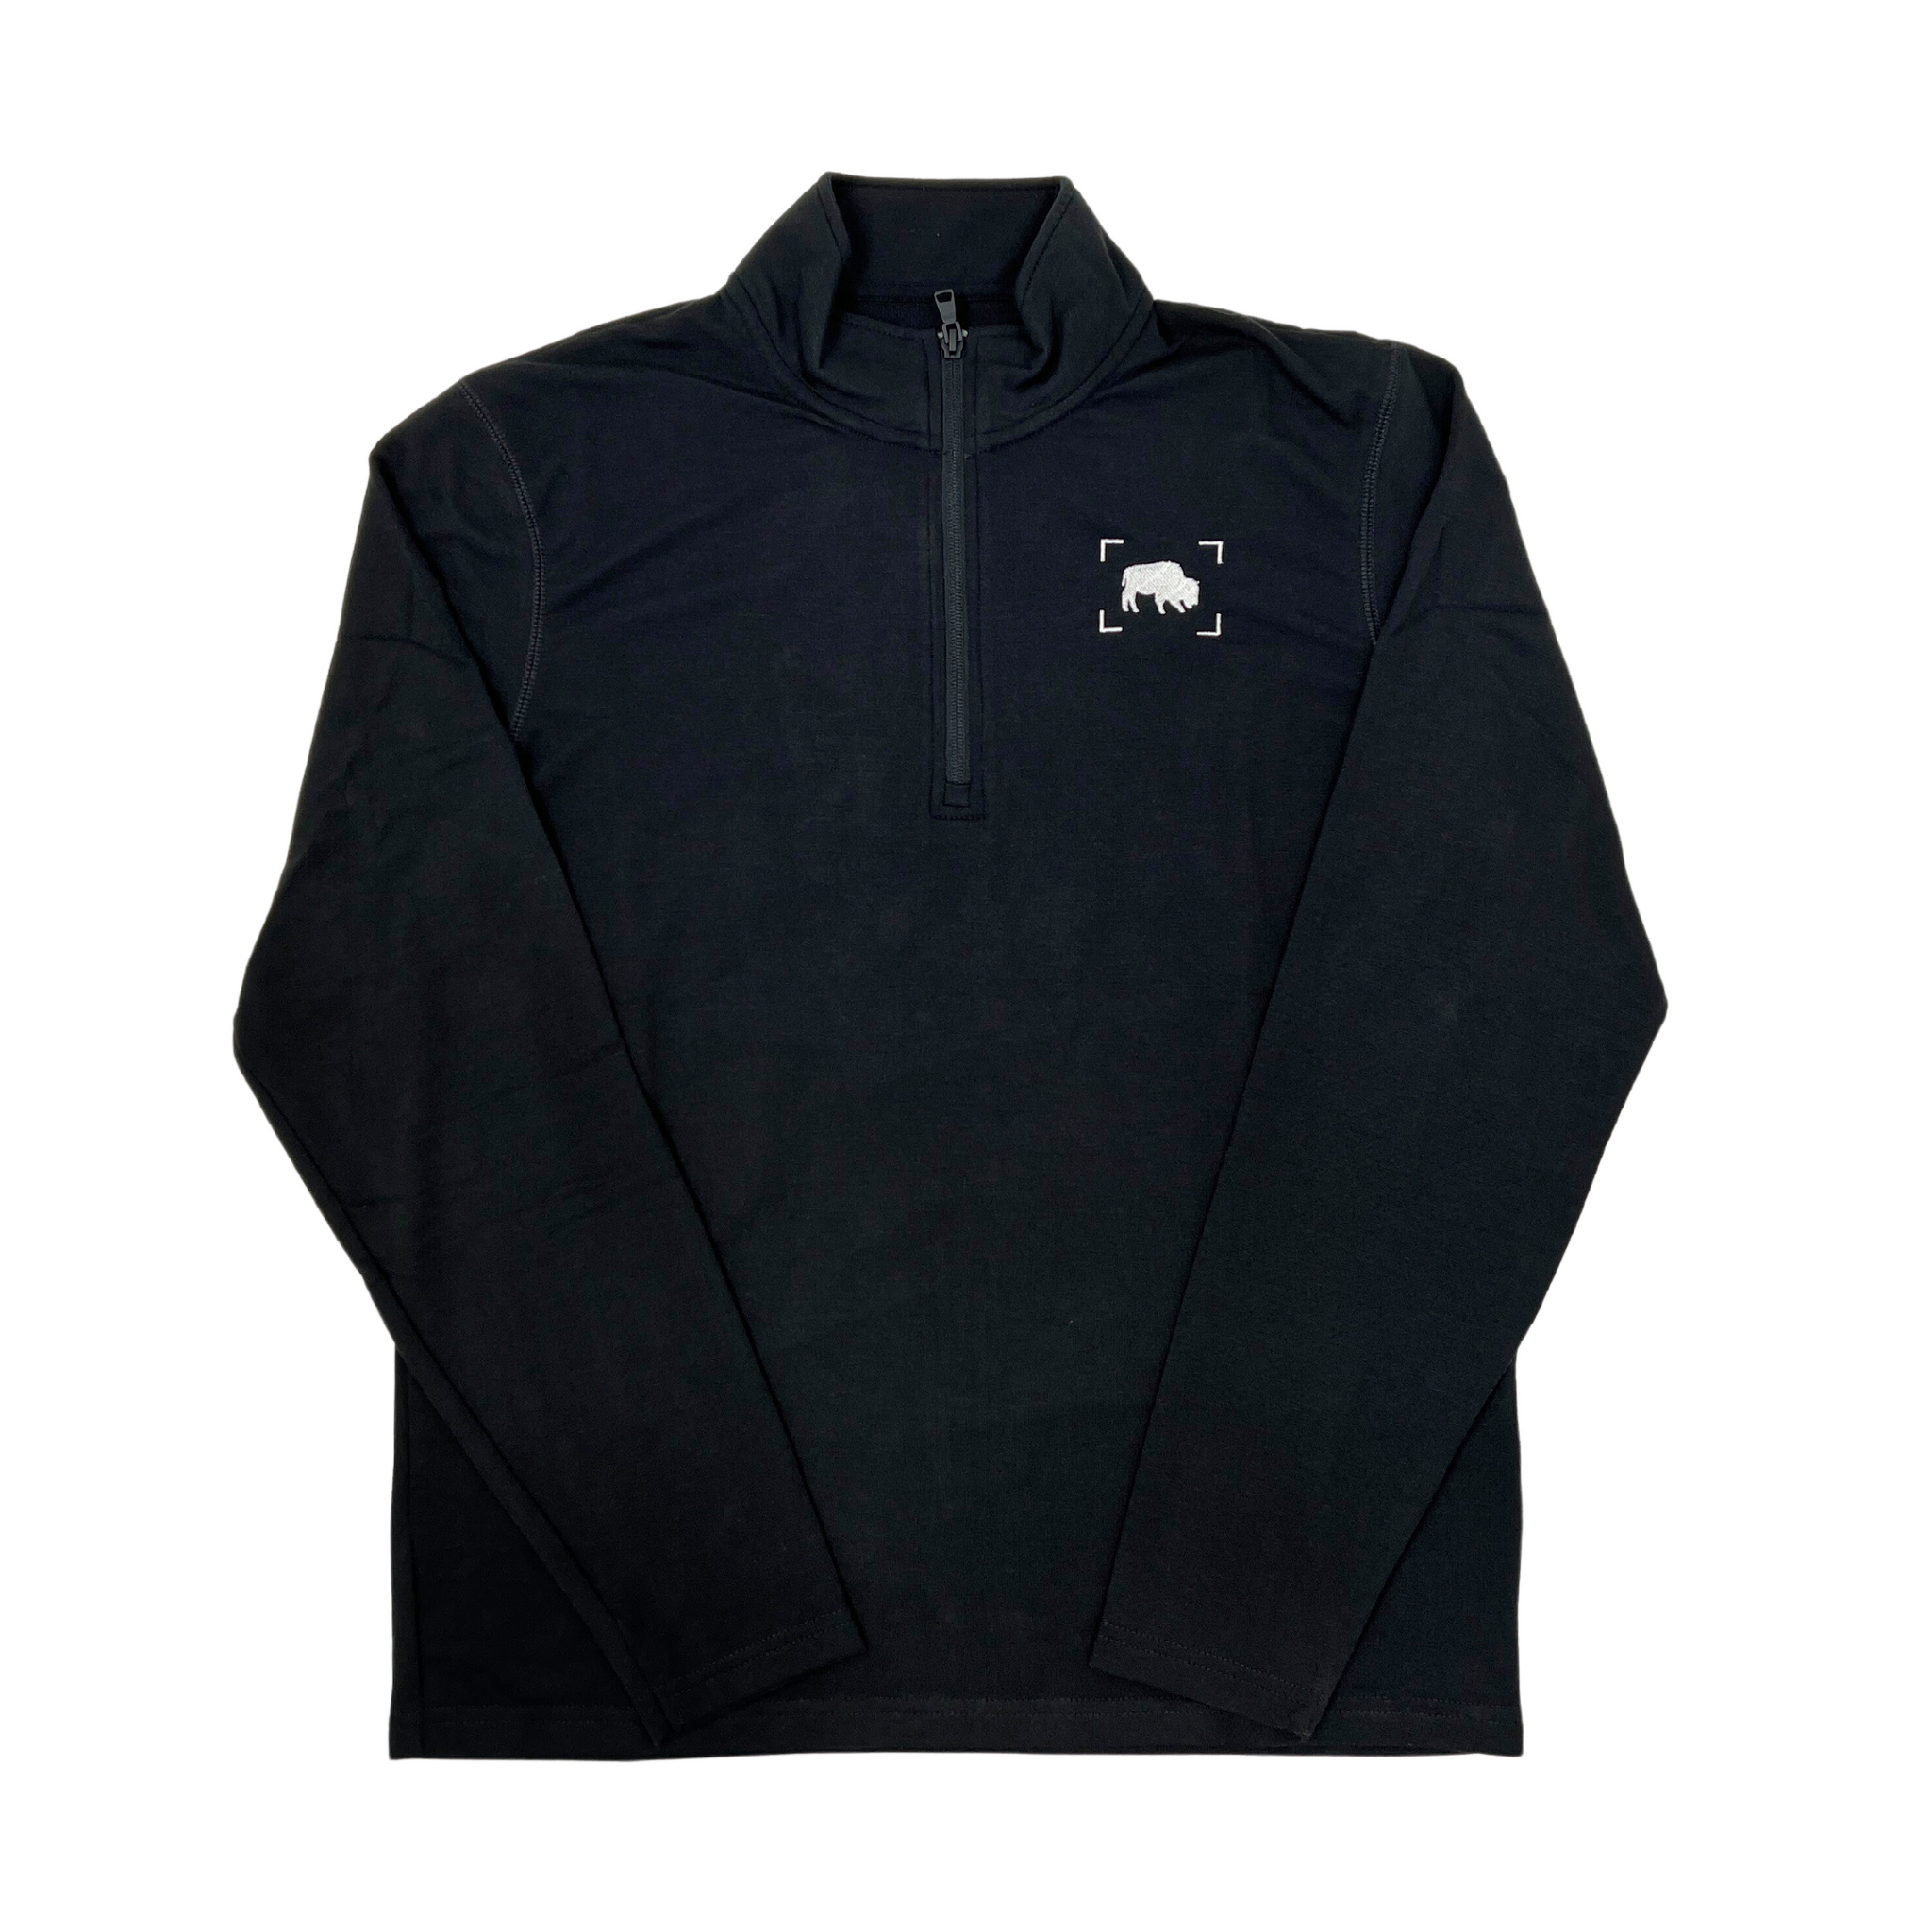 BFLO Black With Embroidered Shutter Buffalo Quarter Zip